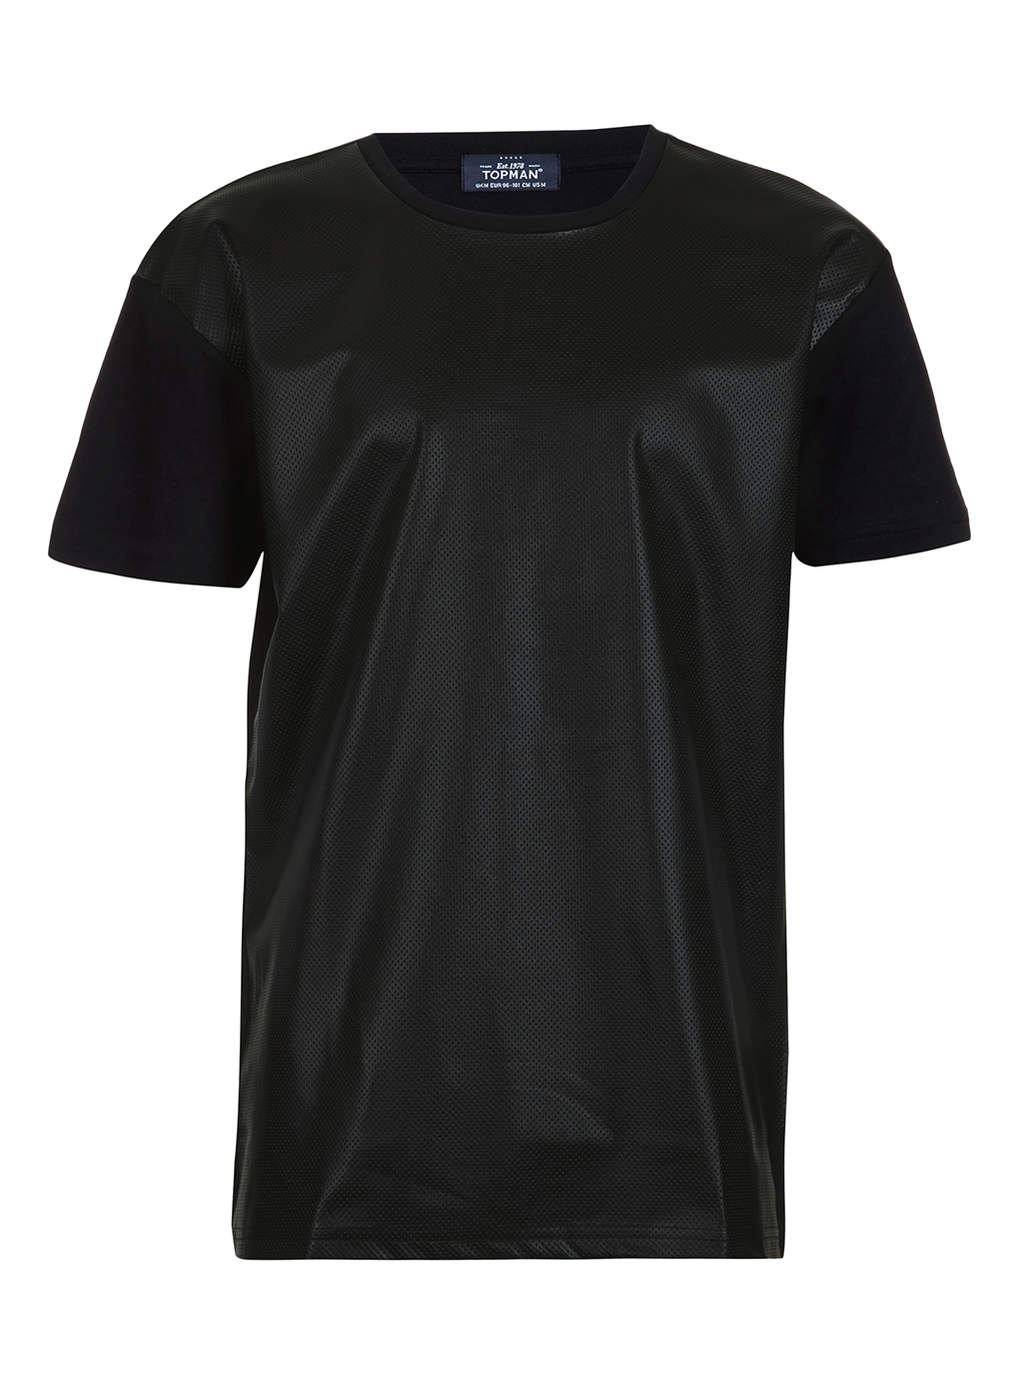 Topman Black Perforated Leather Look Front Tshirt in Black for Men | Lyst